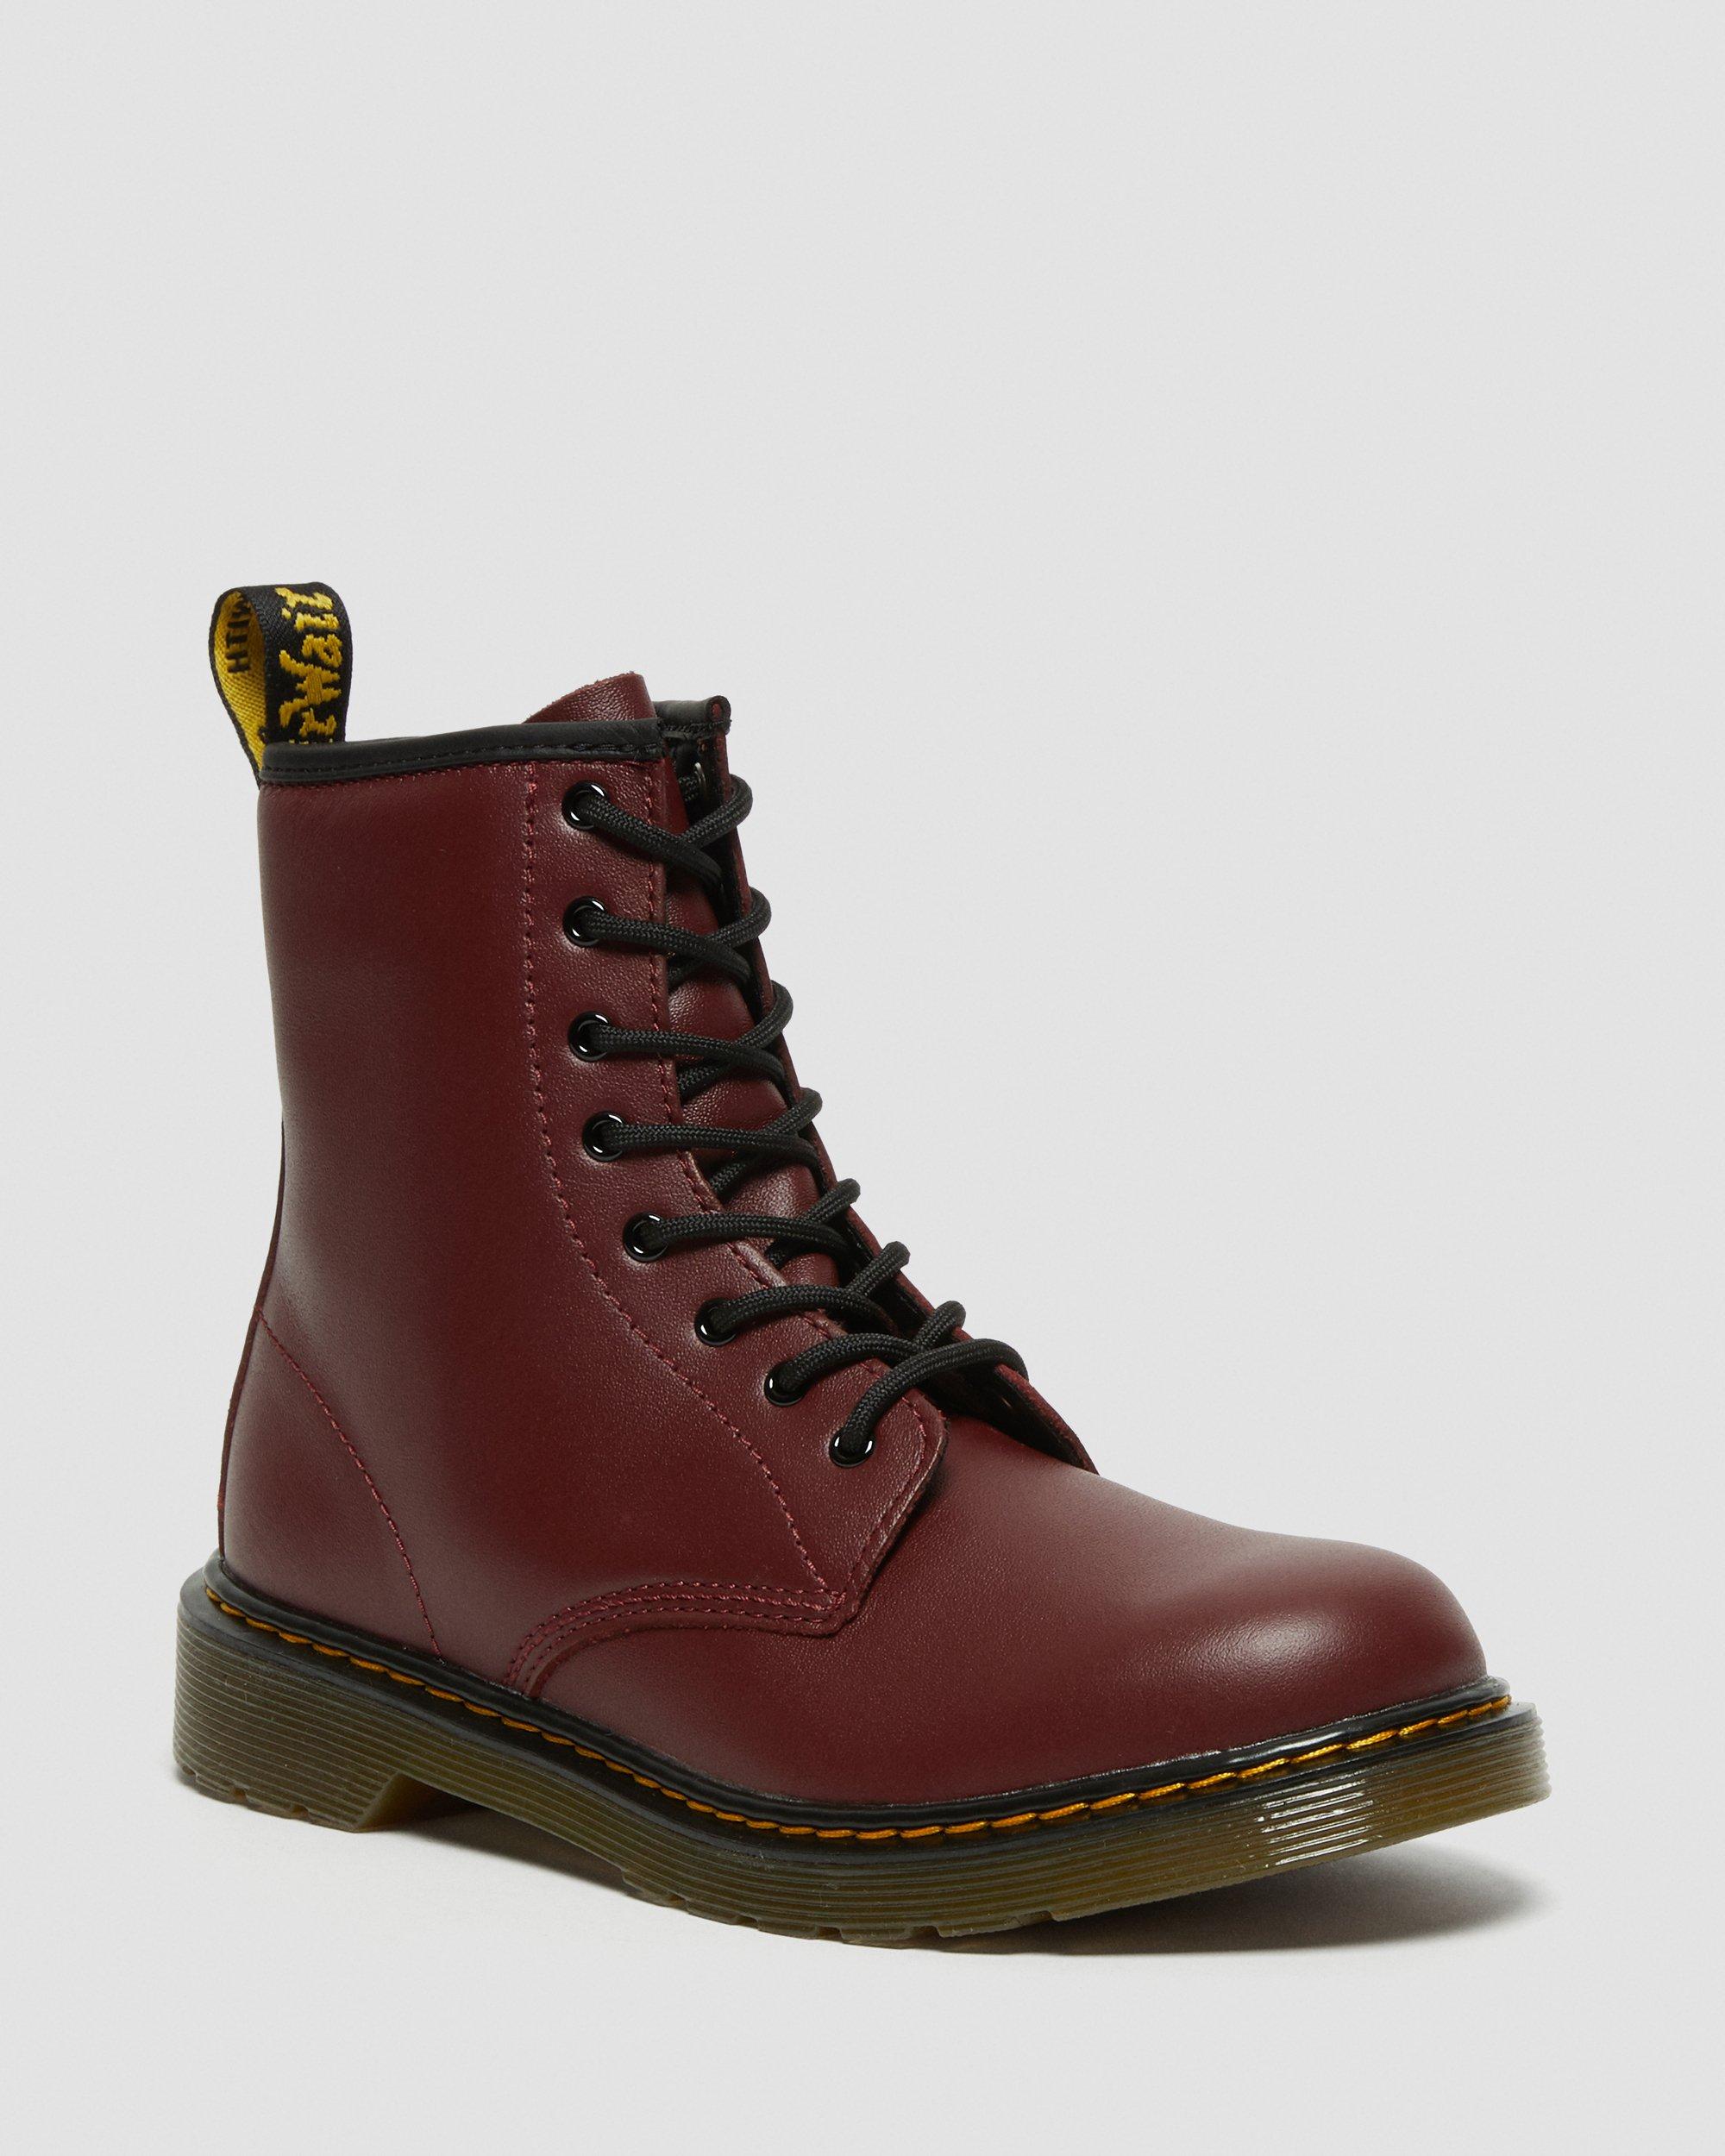 Youth 1460 Softy T Leather Lace Up Boots in Cherry Red | Dr. Martens